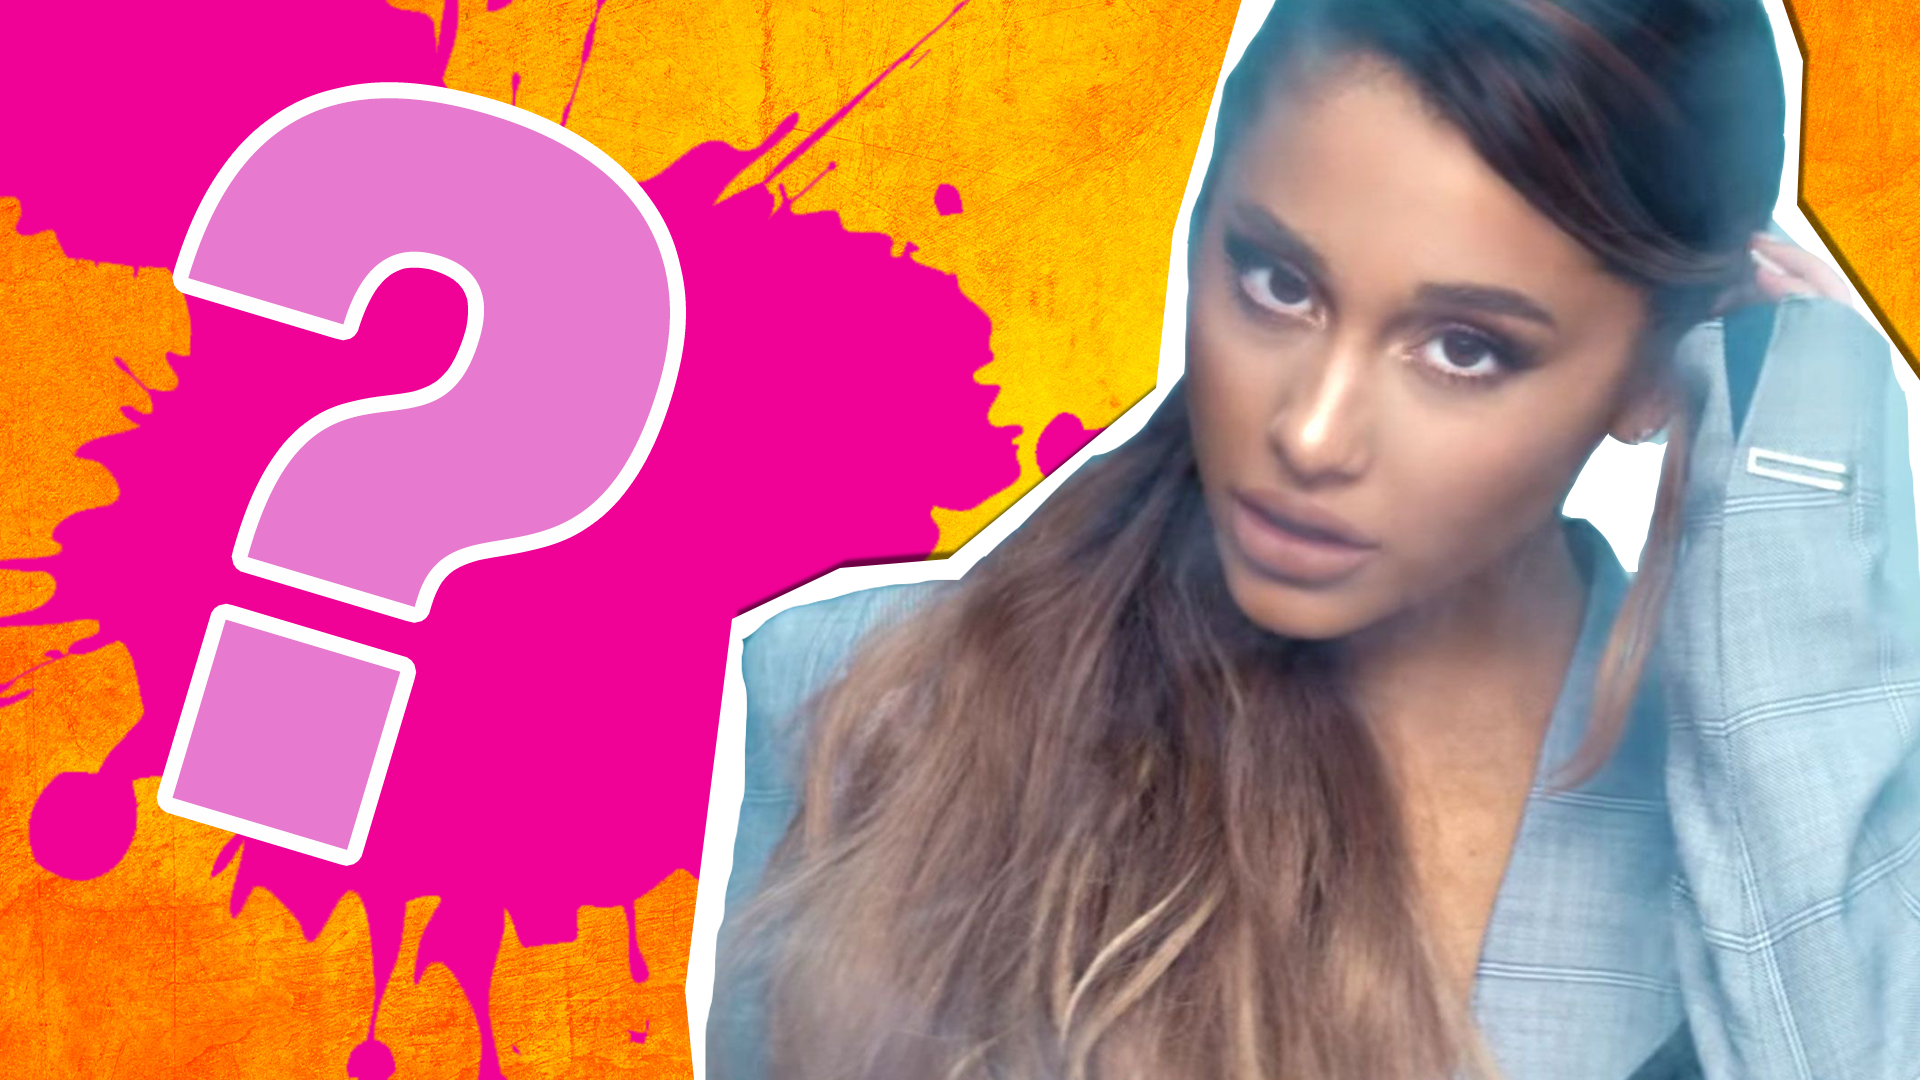 10 Things You Need to Know About Ariana Grande | Beano.com